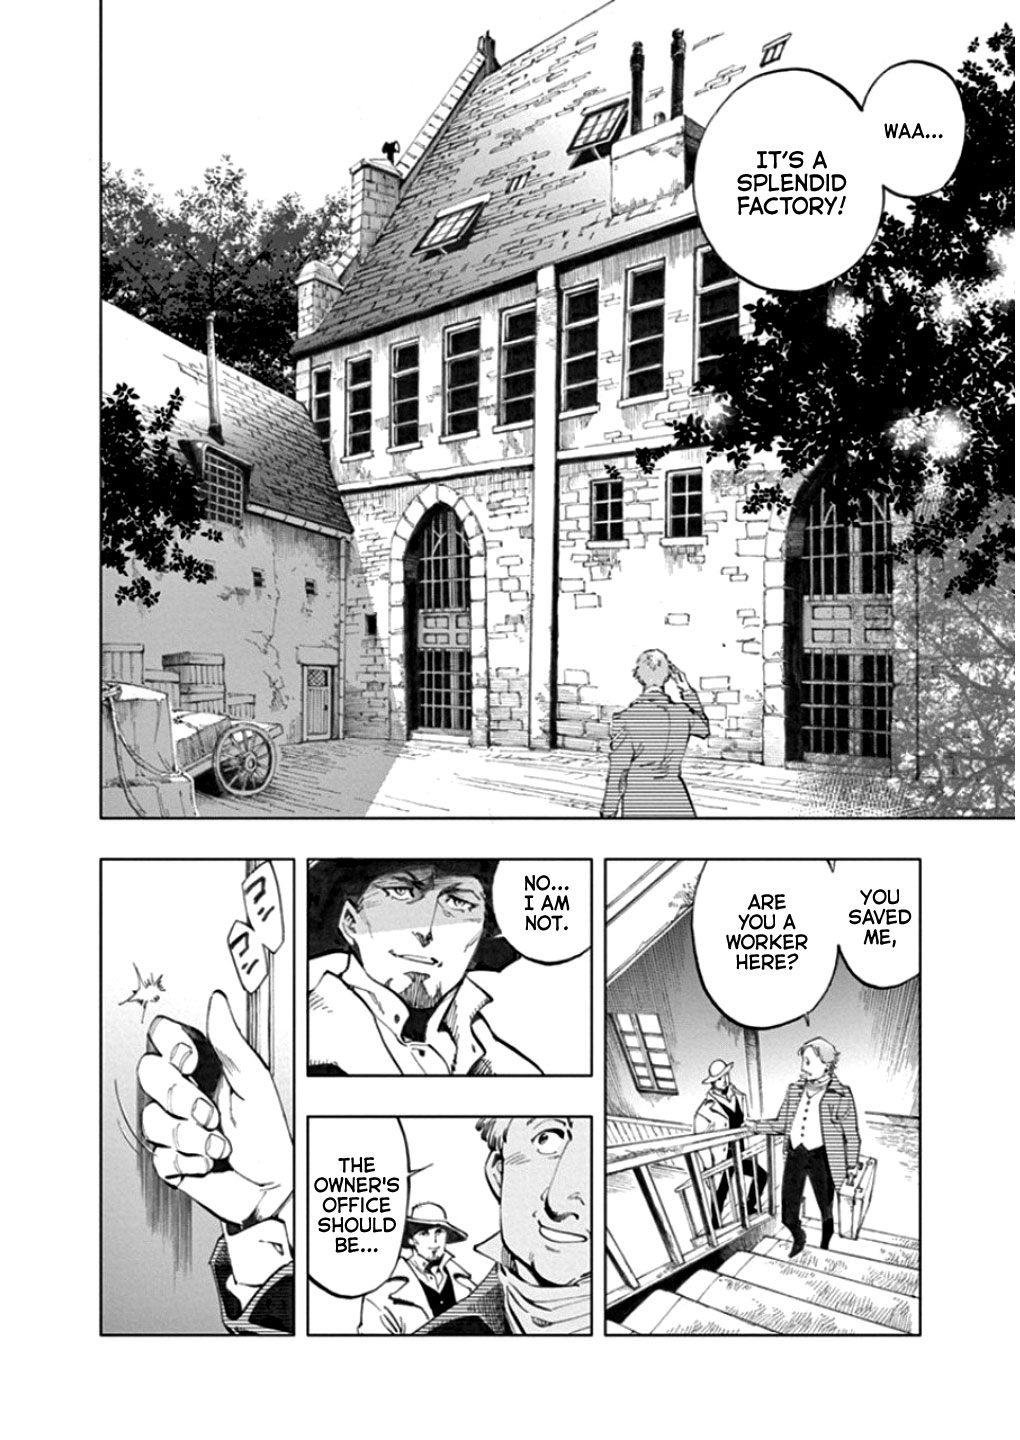 Les Miserables (ARAI Takahiro) Vol. 1 Ch. 5 A Mother Encounters Another